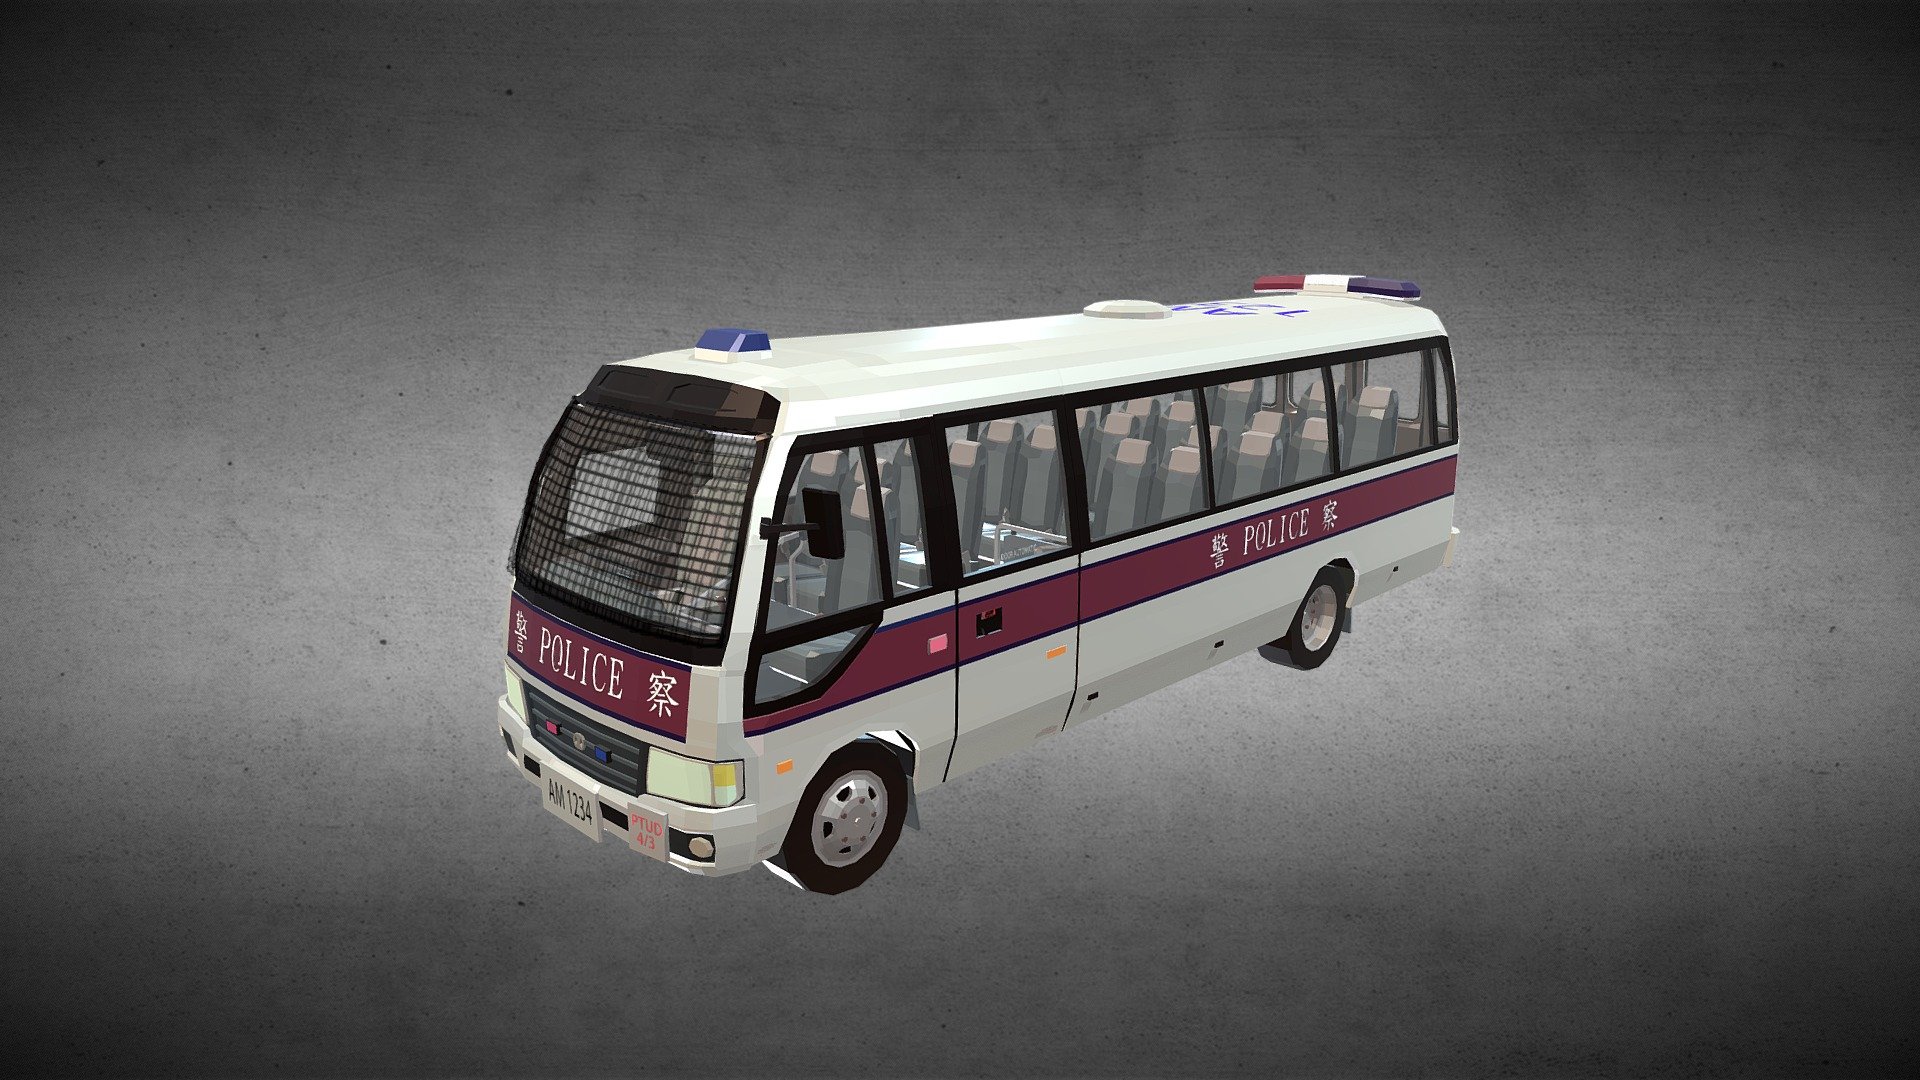 A police personnel carrier. Hong Kong Police (PTU) (Chinese: 警察機動部隊新型運員車)

The Toyota Coaster is a single-decker minibus produced by Toyota Motor Corporation.

You can find out more information on Wiki below.

https://en.wikipedia.org/wiki/Police_vehicles_in_Hong_Kong

https://en.wikipedia.org/wiki/Toyota_Coaster

I created this model by using Blender, just use it in your commercial game, credit businessyuen.com is appreciated.

Find more products here

Police Pack

SchoolBus

Bus Dennis Enviro 400

Train Pack

Please follow me and buy me a coffee, visit my own website for other formats businessyuen.com. thank you. ^.^ - Hong Kong Police Personnel Carrier - Buy Royalty Free 3D model by businessyuen 3d model